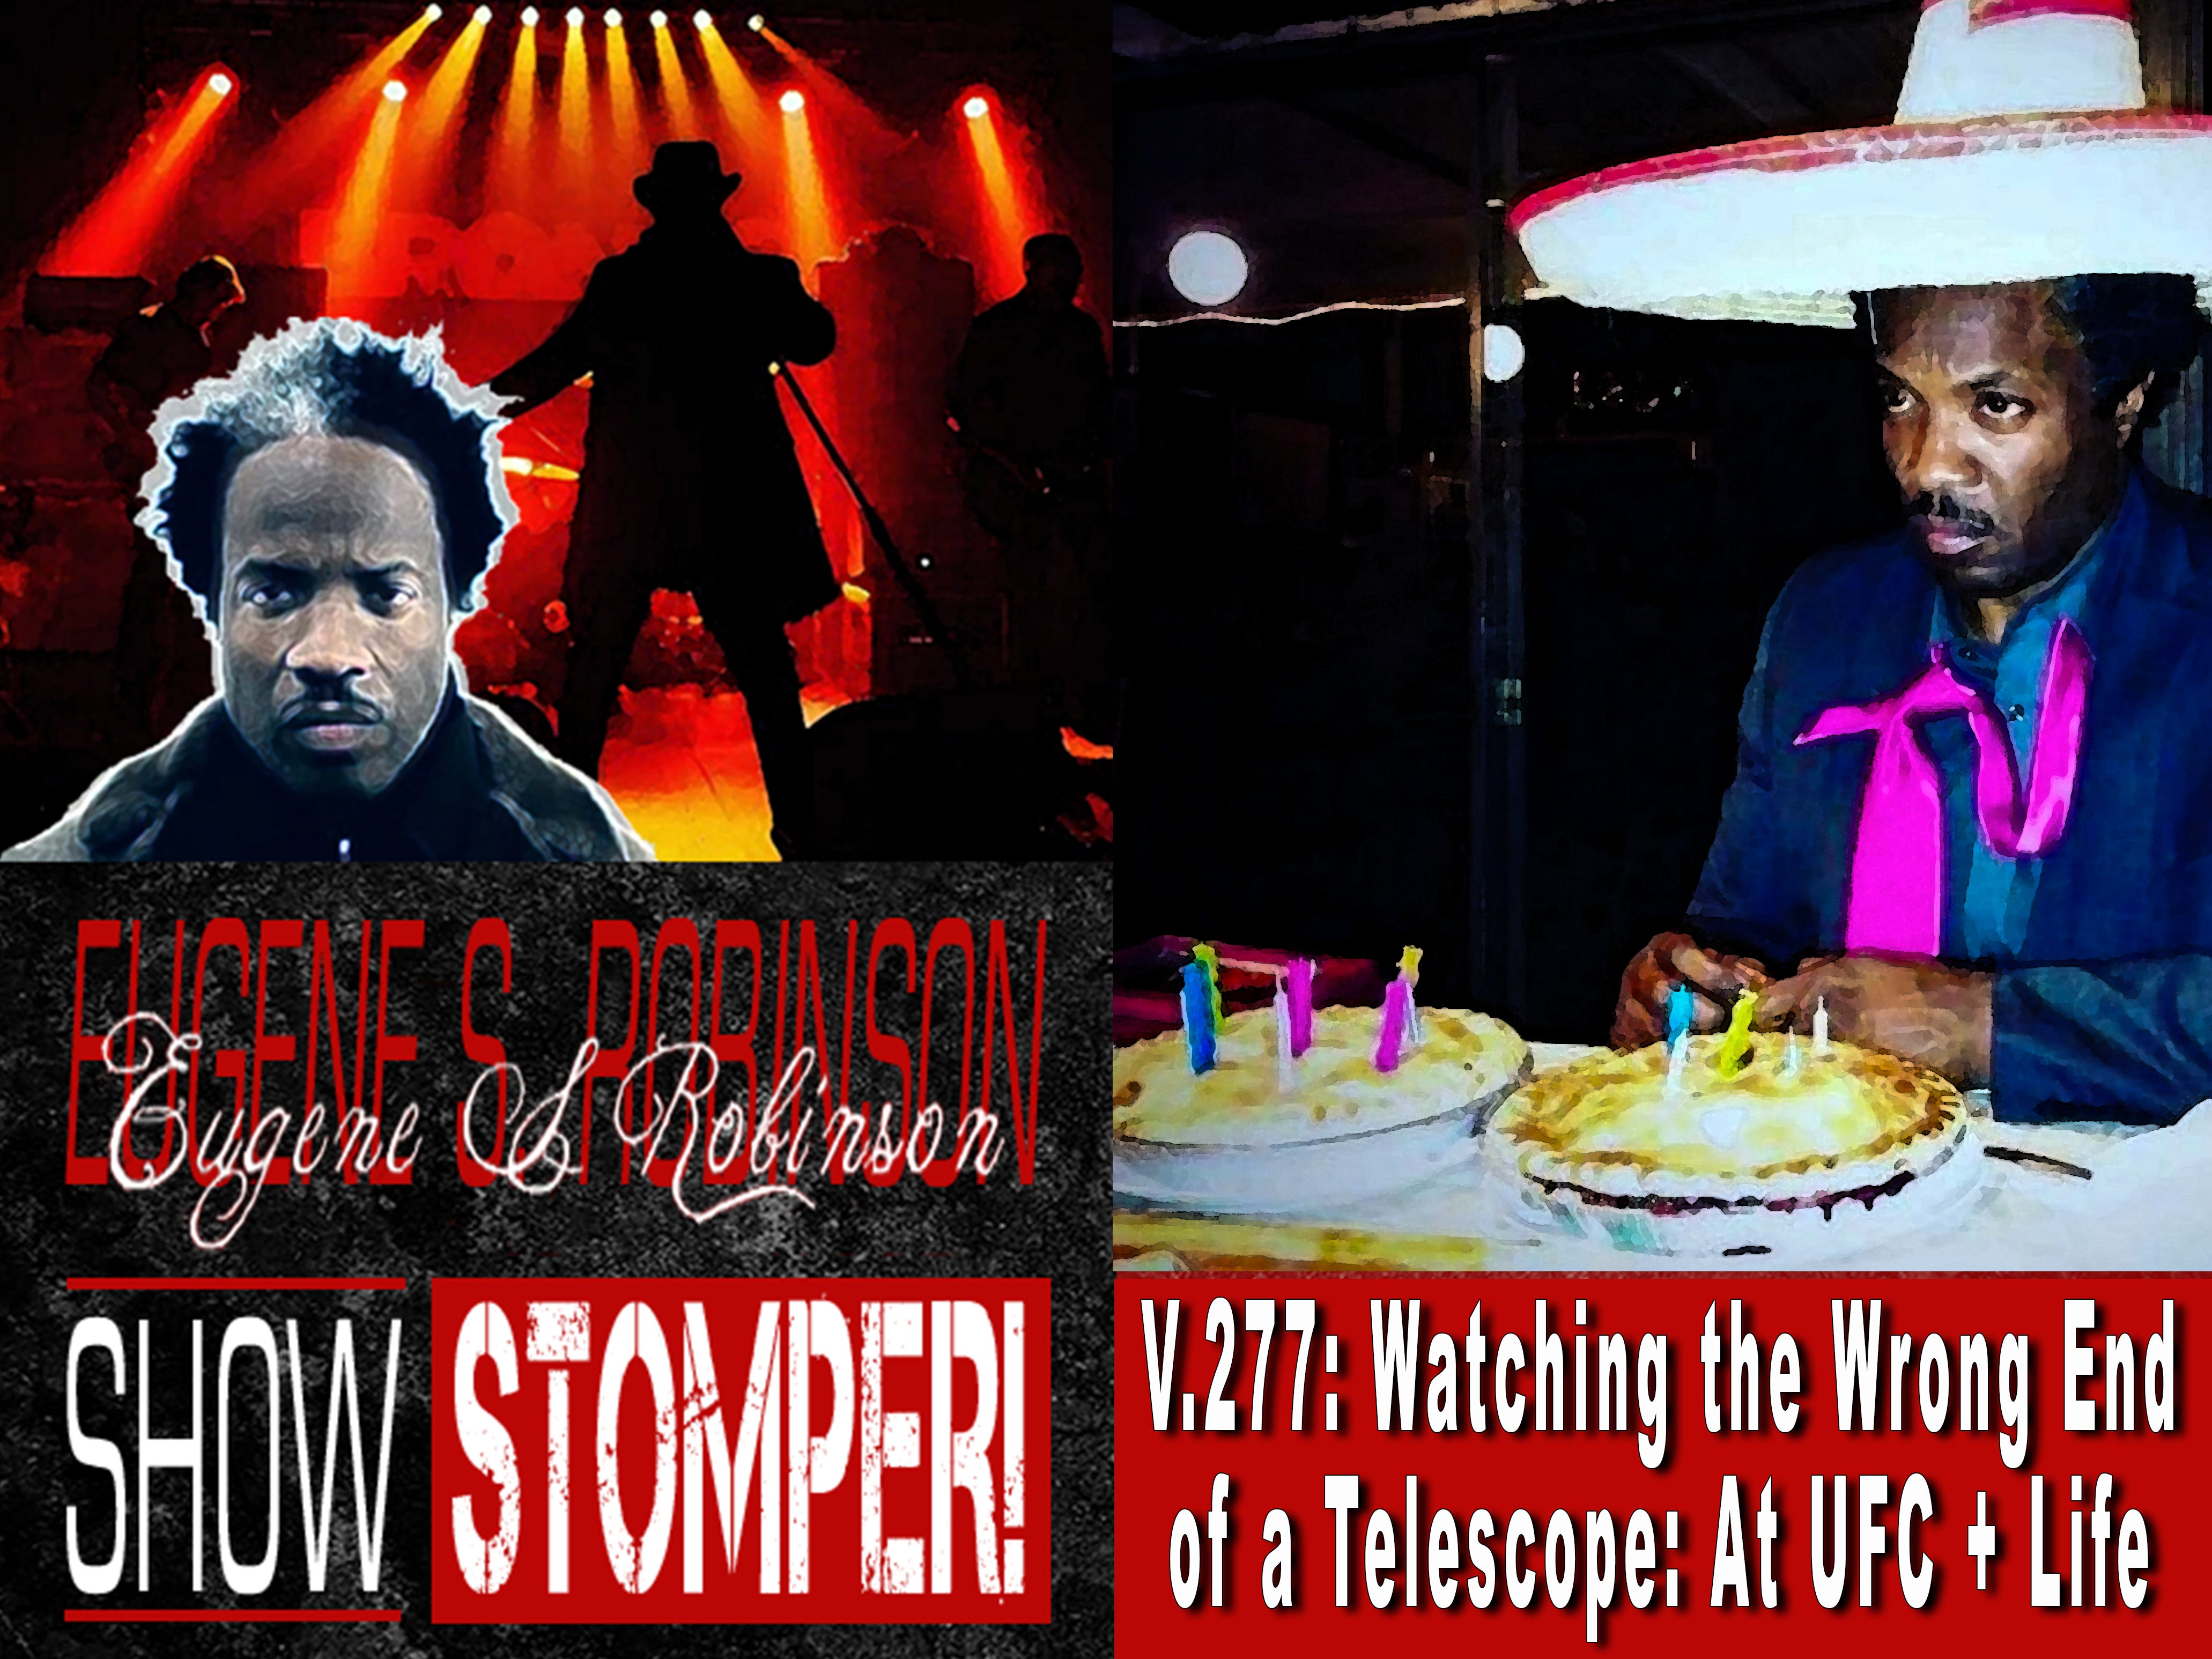 V.277: Watching the Wrong End of a Telescope: At UFC + Life On The Eugene S. Robinson Show Stomper!